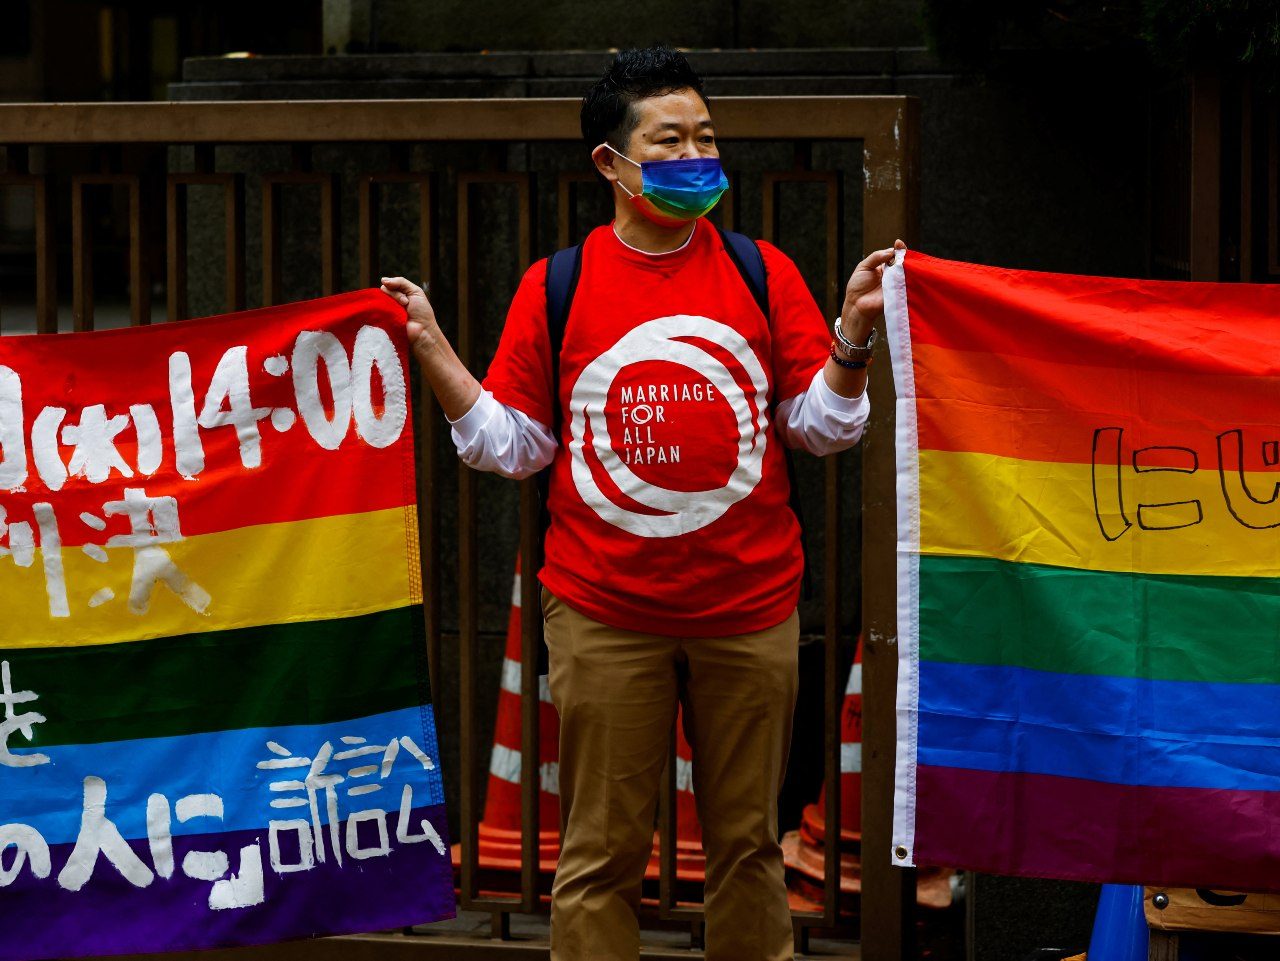 Japan court upholds ban on same-sex marriage but voices rights concern